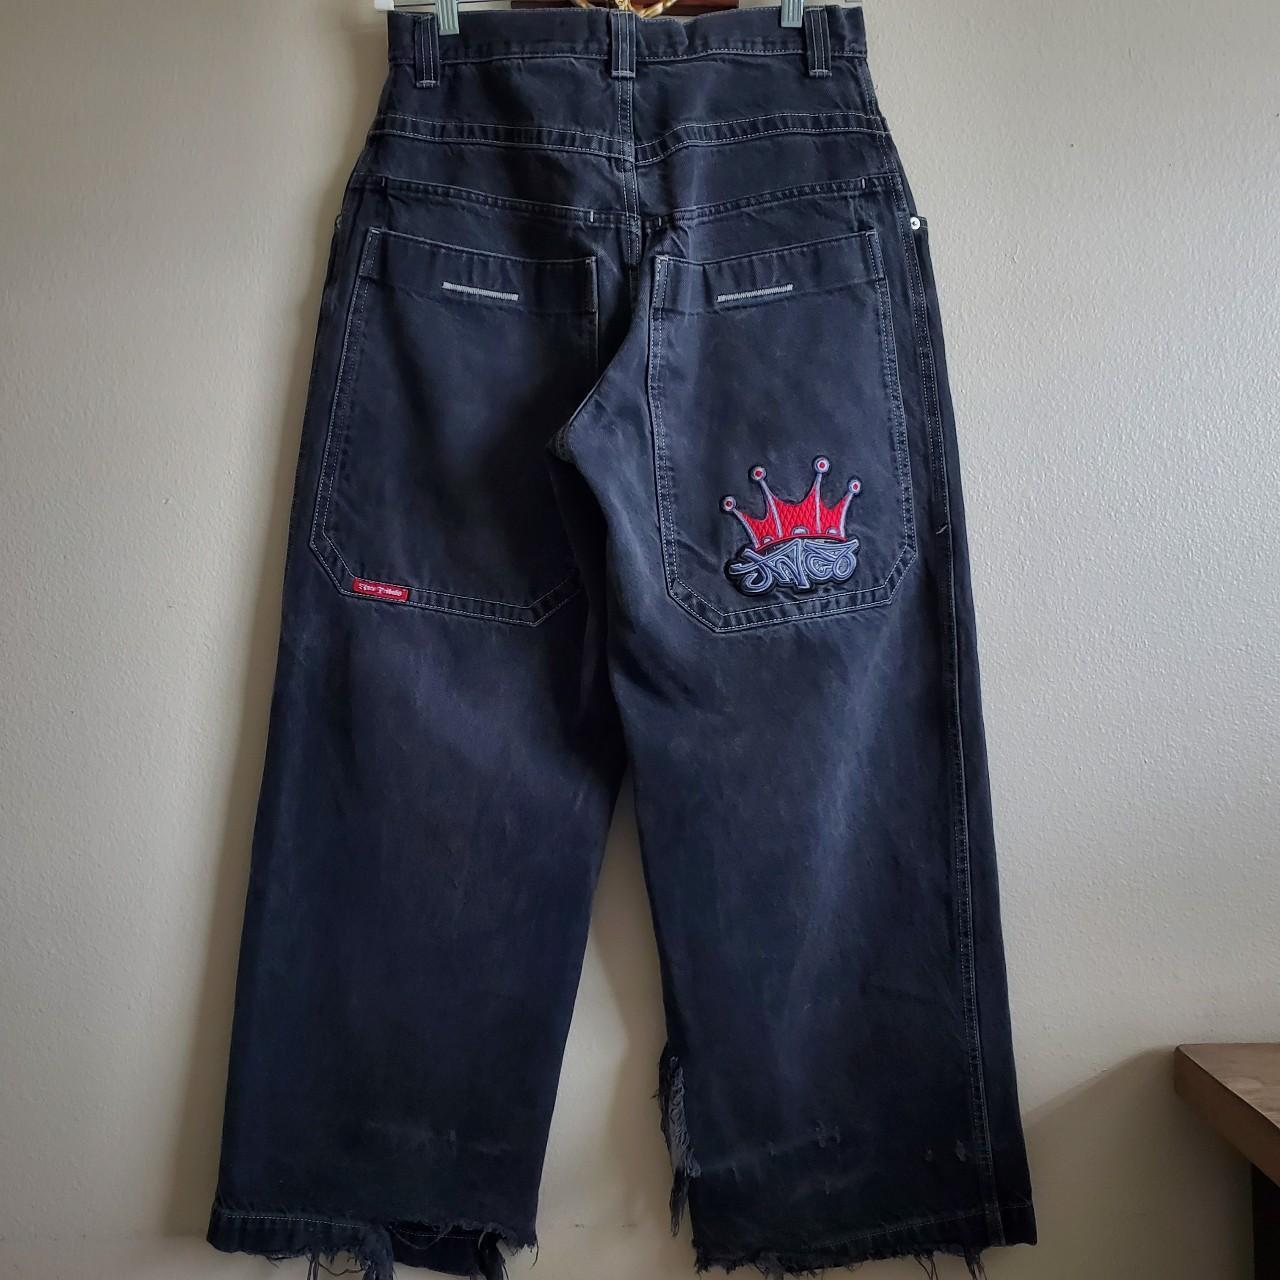 JNCO Men's Black and Red Trousers | Depop